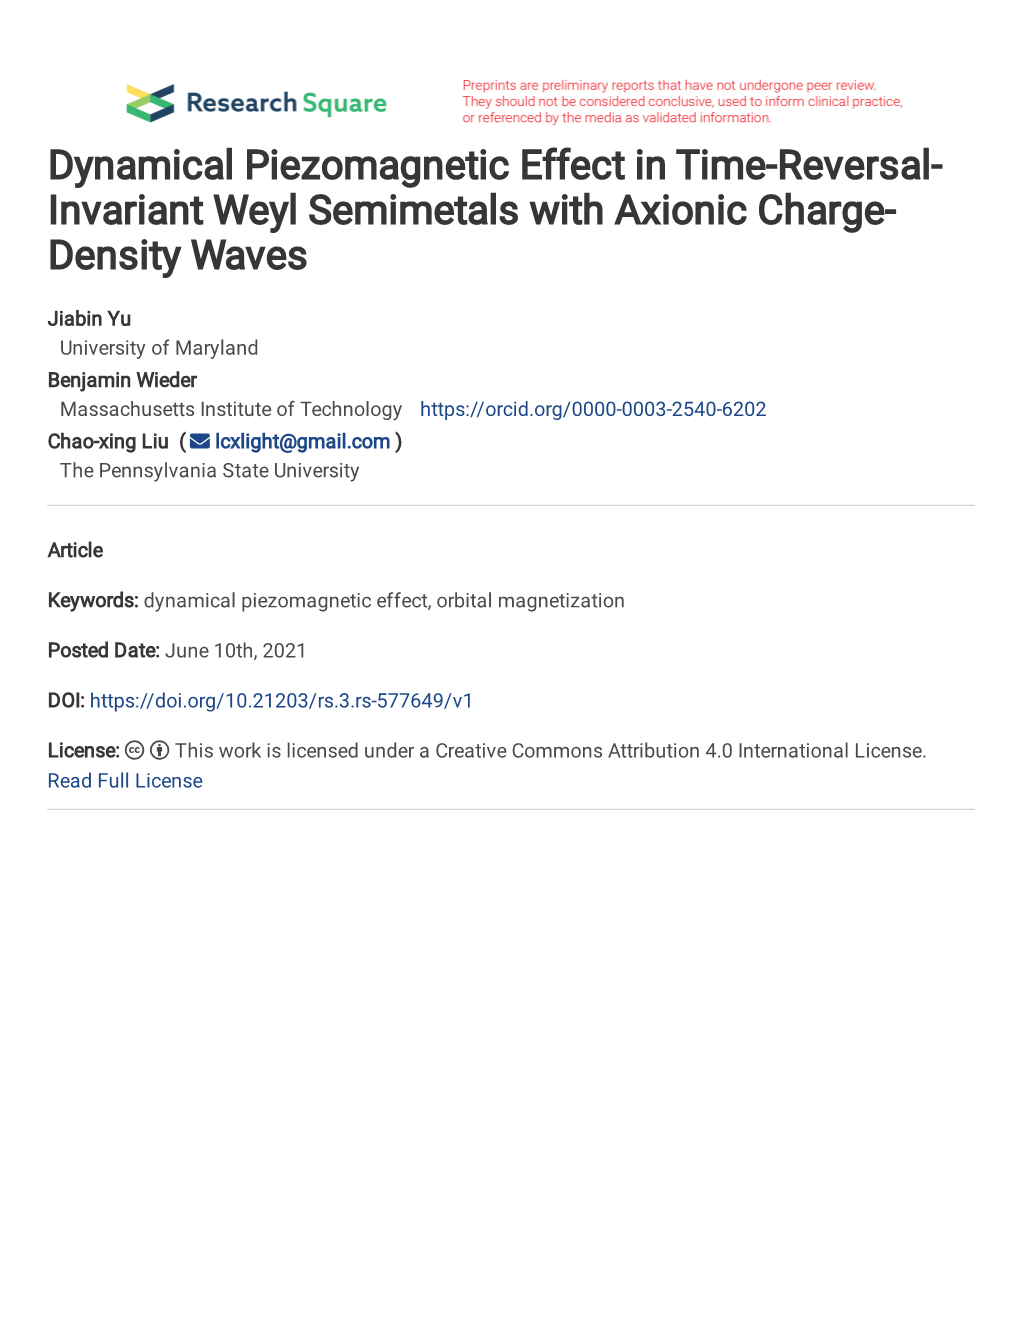 Invariant Weyl Semimetals with Axionic Charge- Density Waves